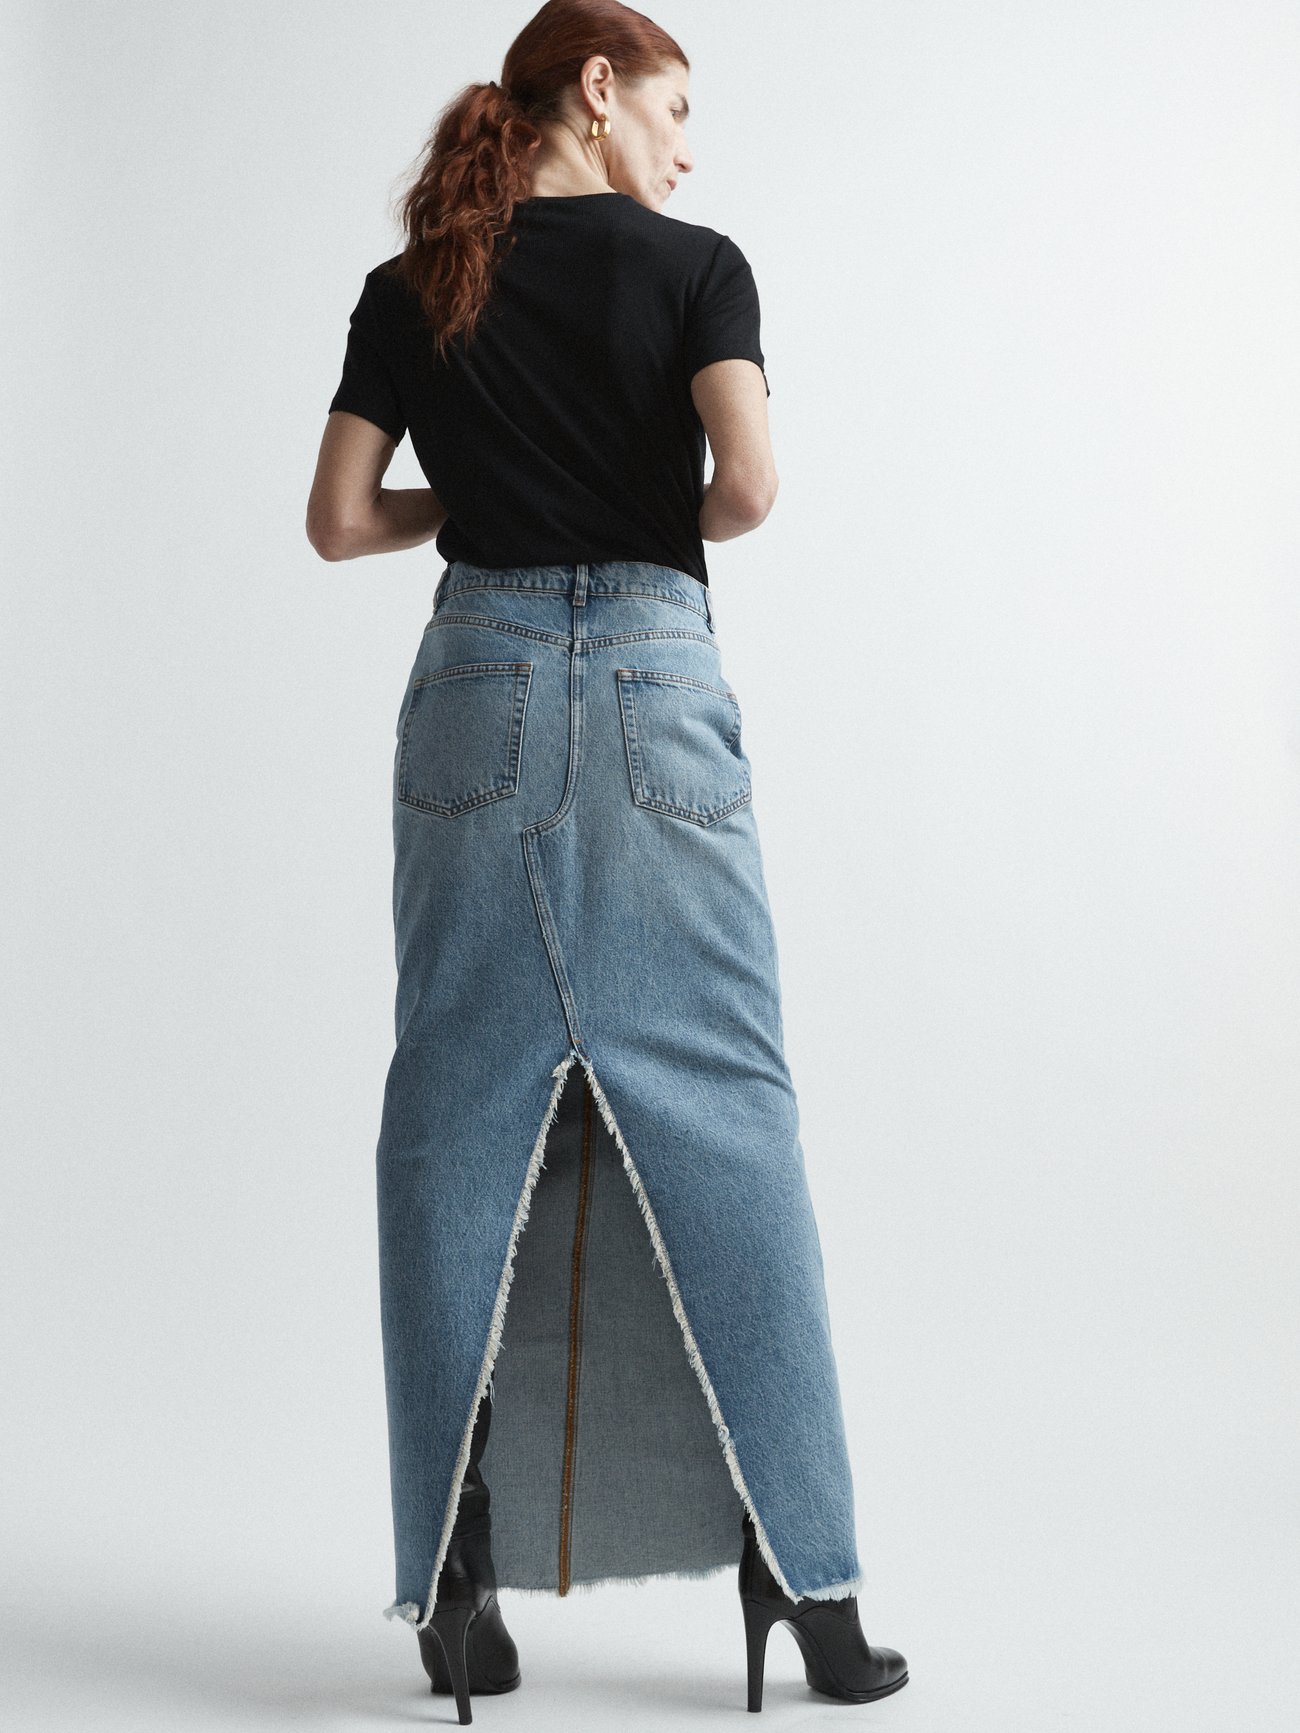 Cut from panels of washed organic denim, Raey's blue workwear-inspired maxi skirt is shaped with raw-hemmed edges and a back slit.